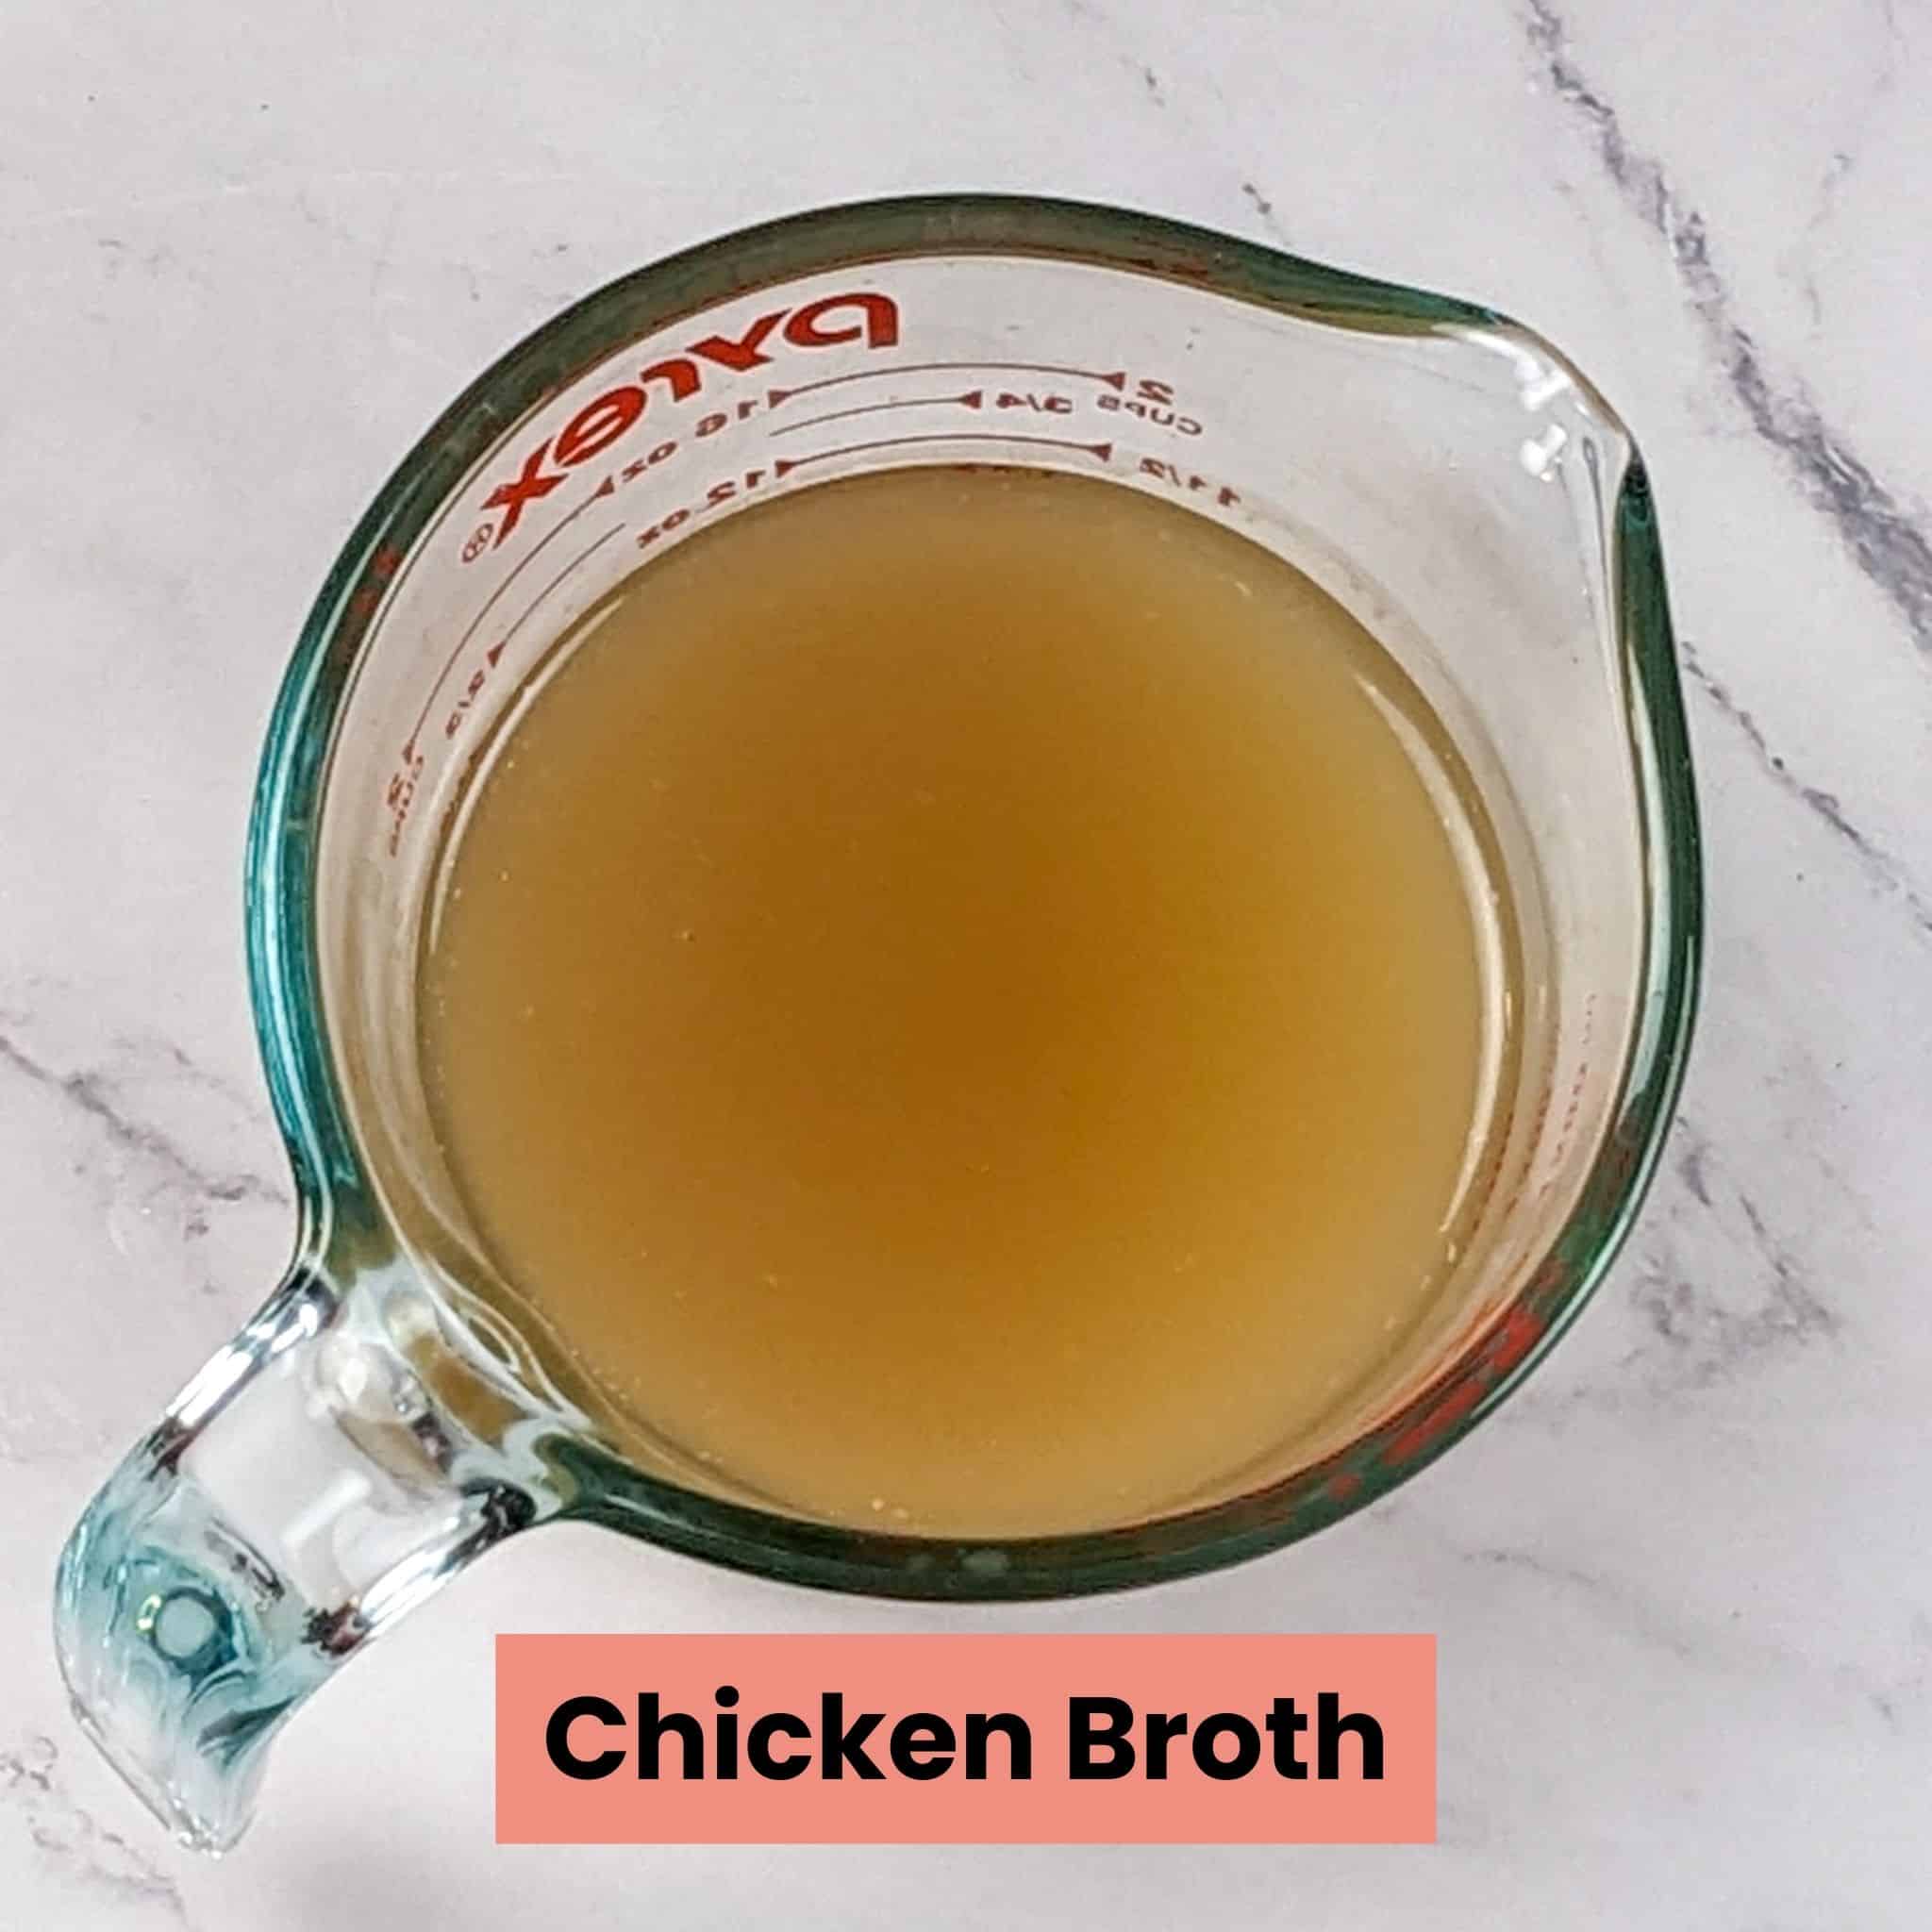 chicken broth in a glass pyrex 2-cup measuring cup.